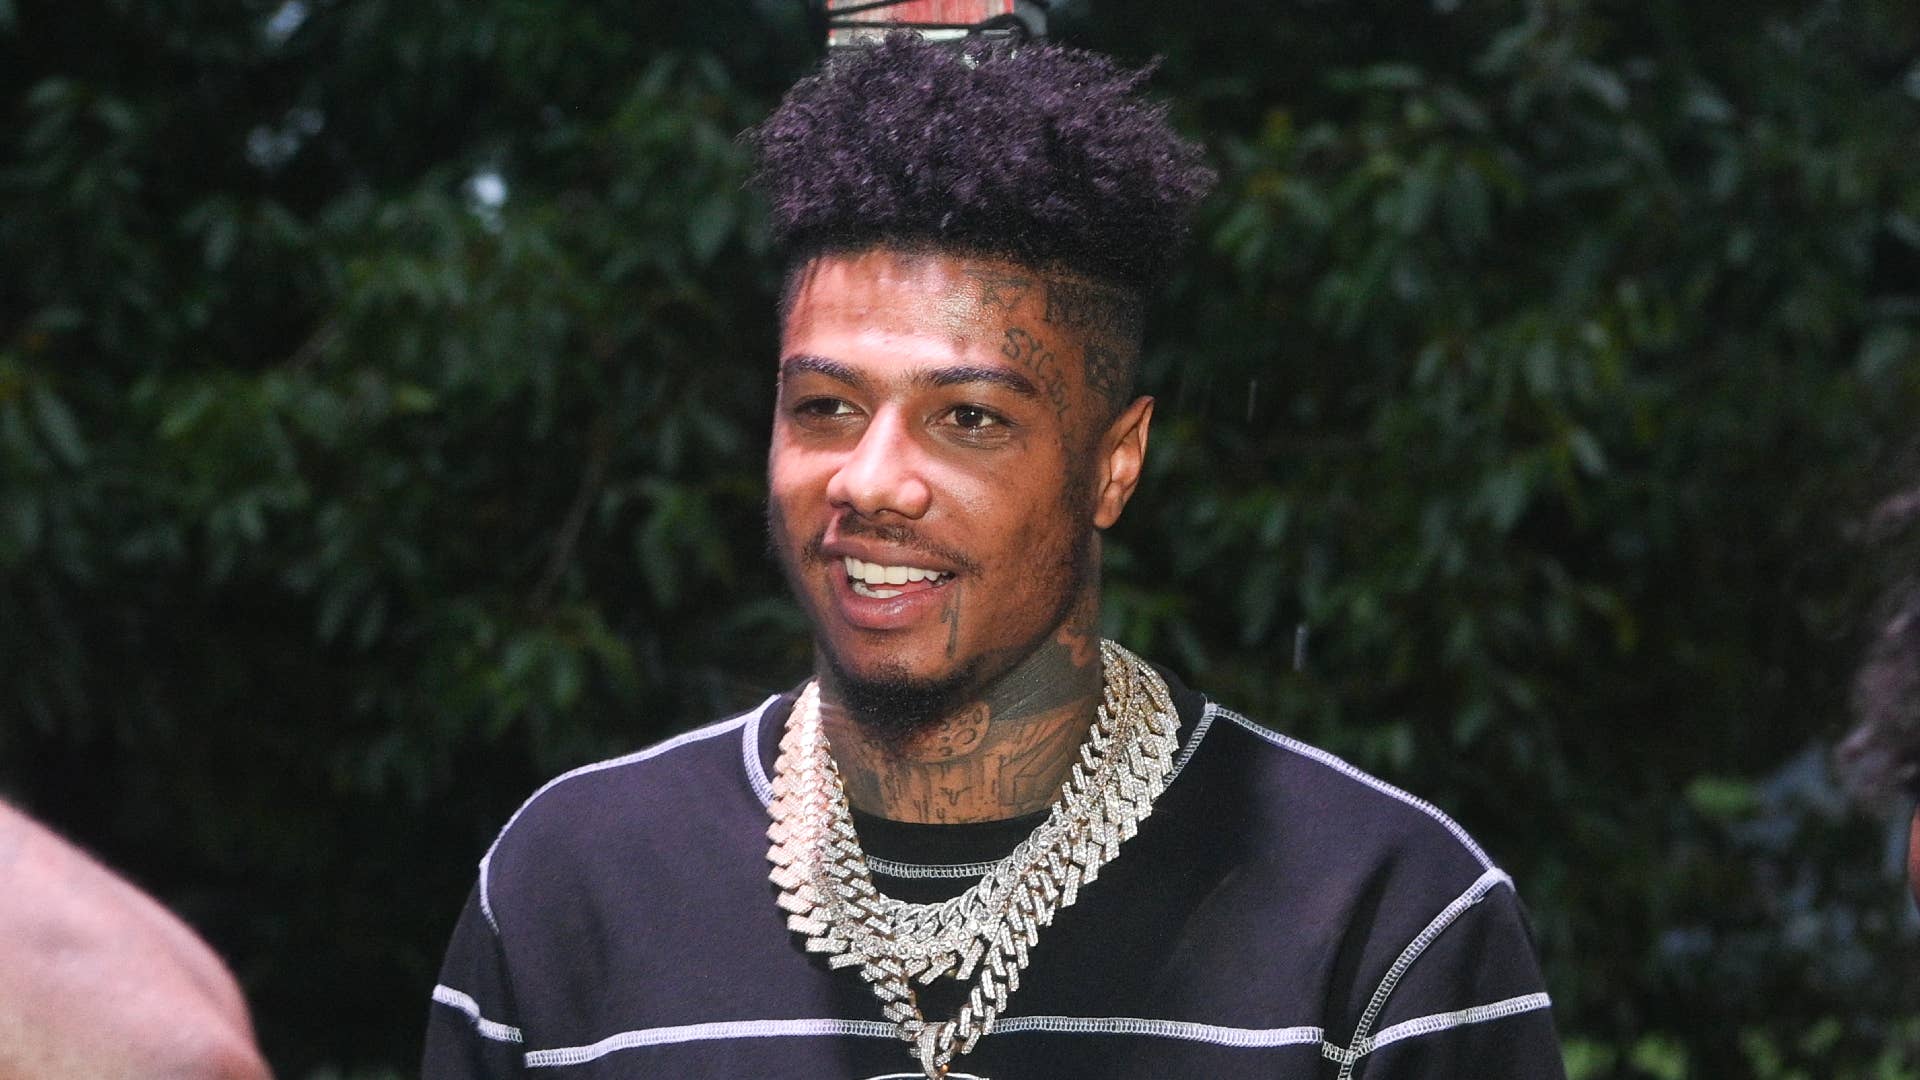 Blueface is seen at an event